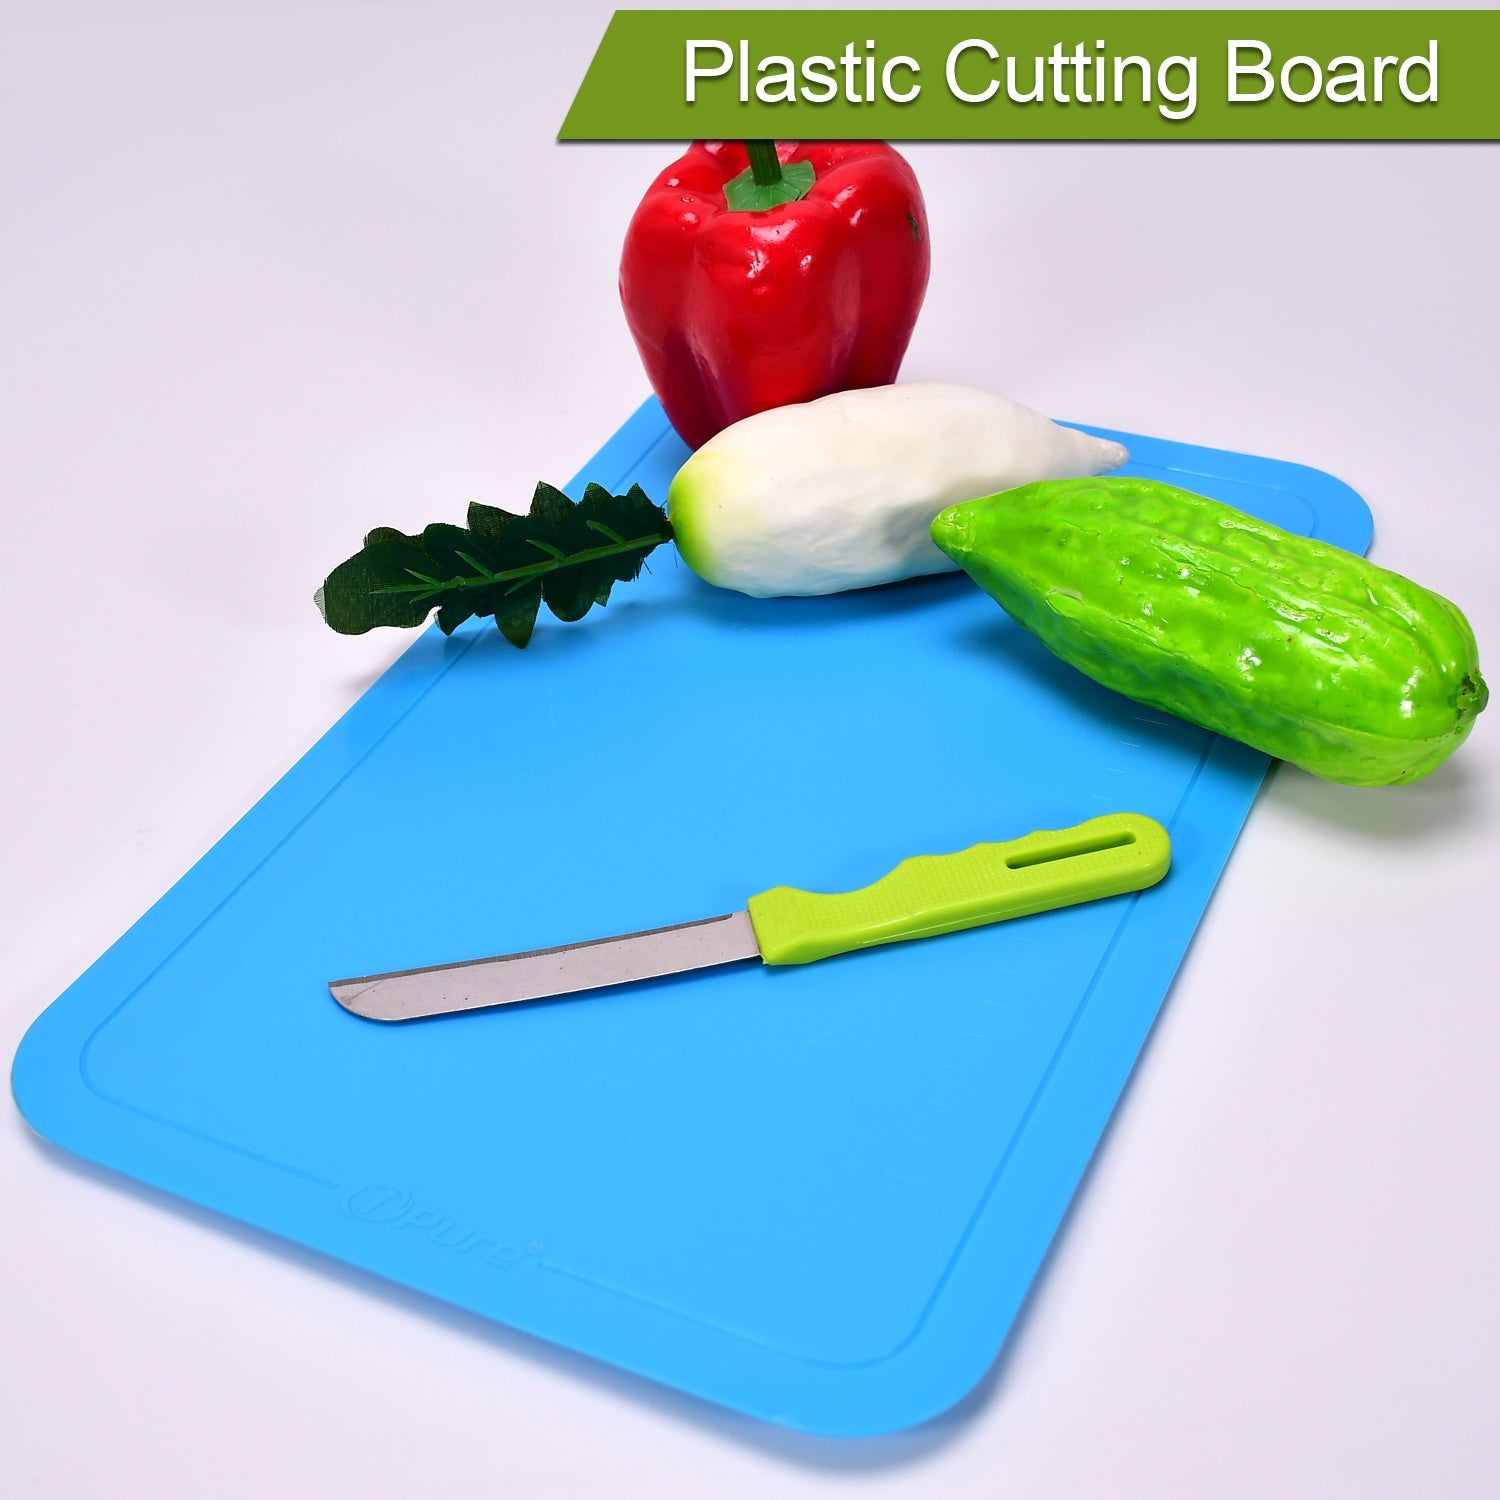 2478 Vegetables and Fruits Cutting Chopping Board Plastic Chopper Cutter Board Non-slip Antibacterial Surface with Extra Thickness DeoDap